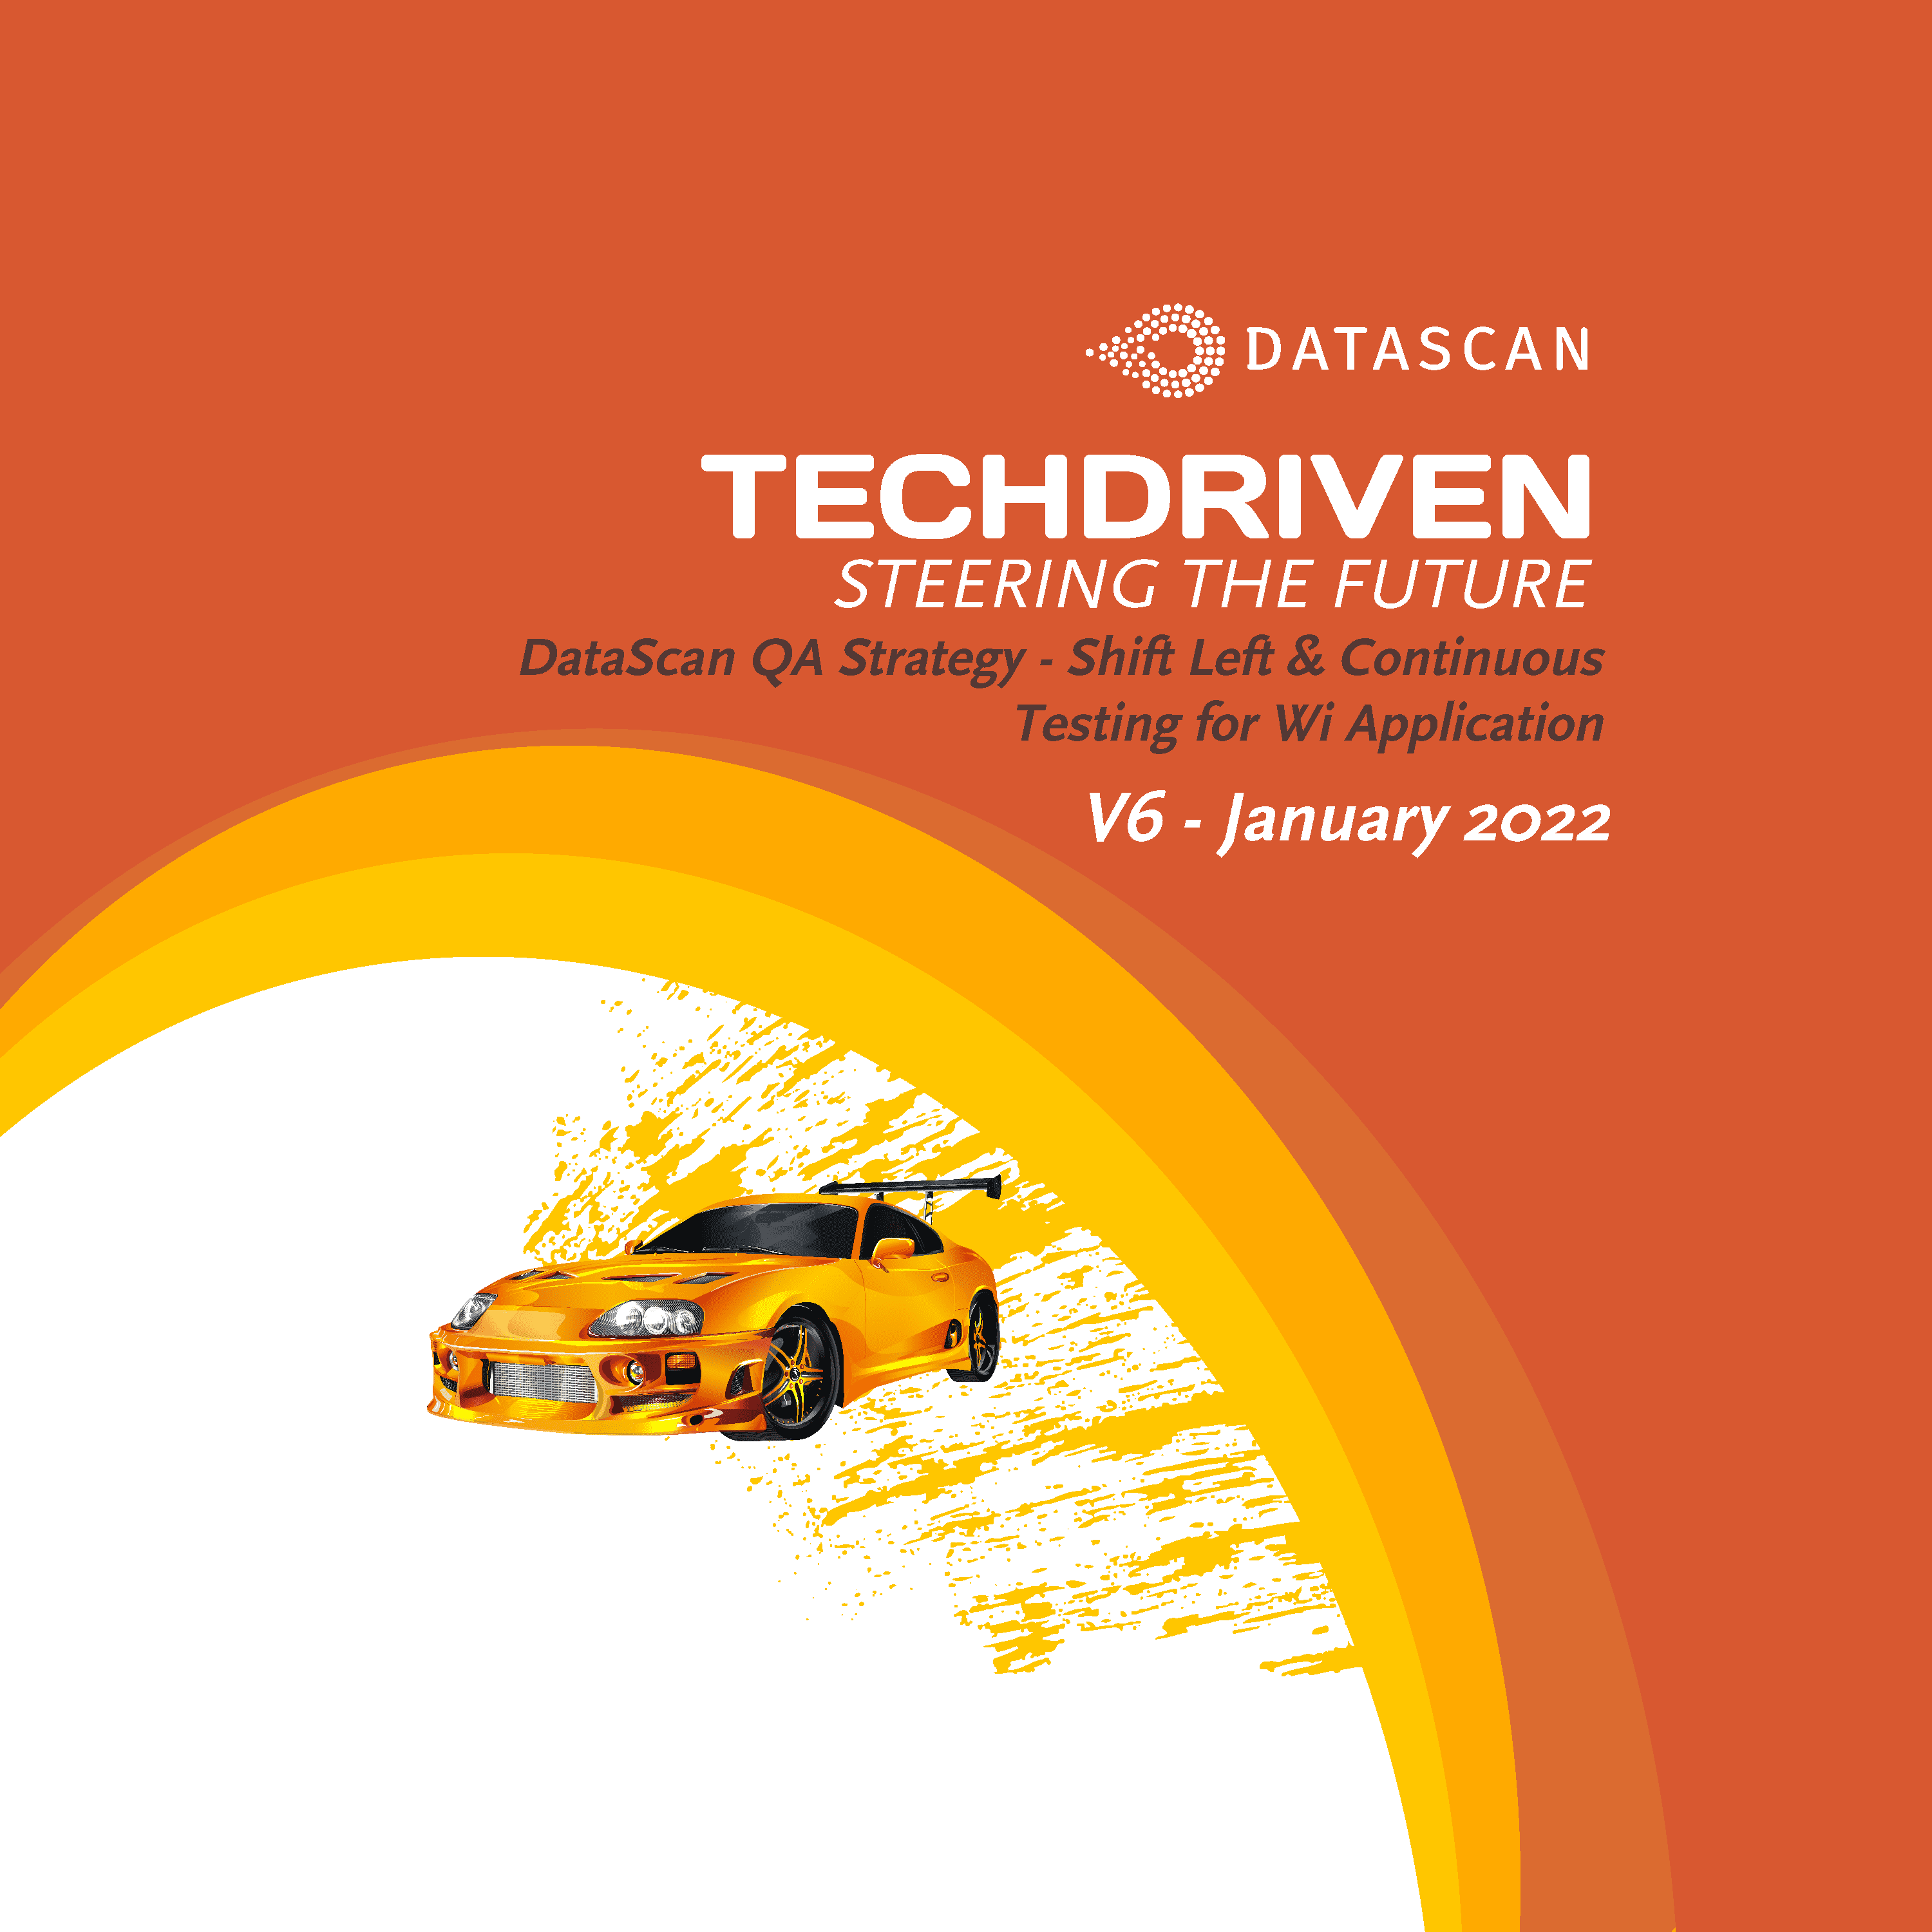 TechDriven: DataScan QA Strategy – Shift Left & Continuous Testing for Wi Application